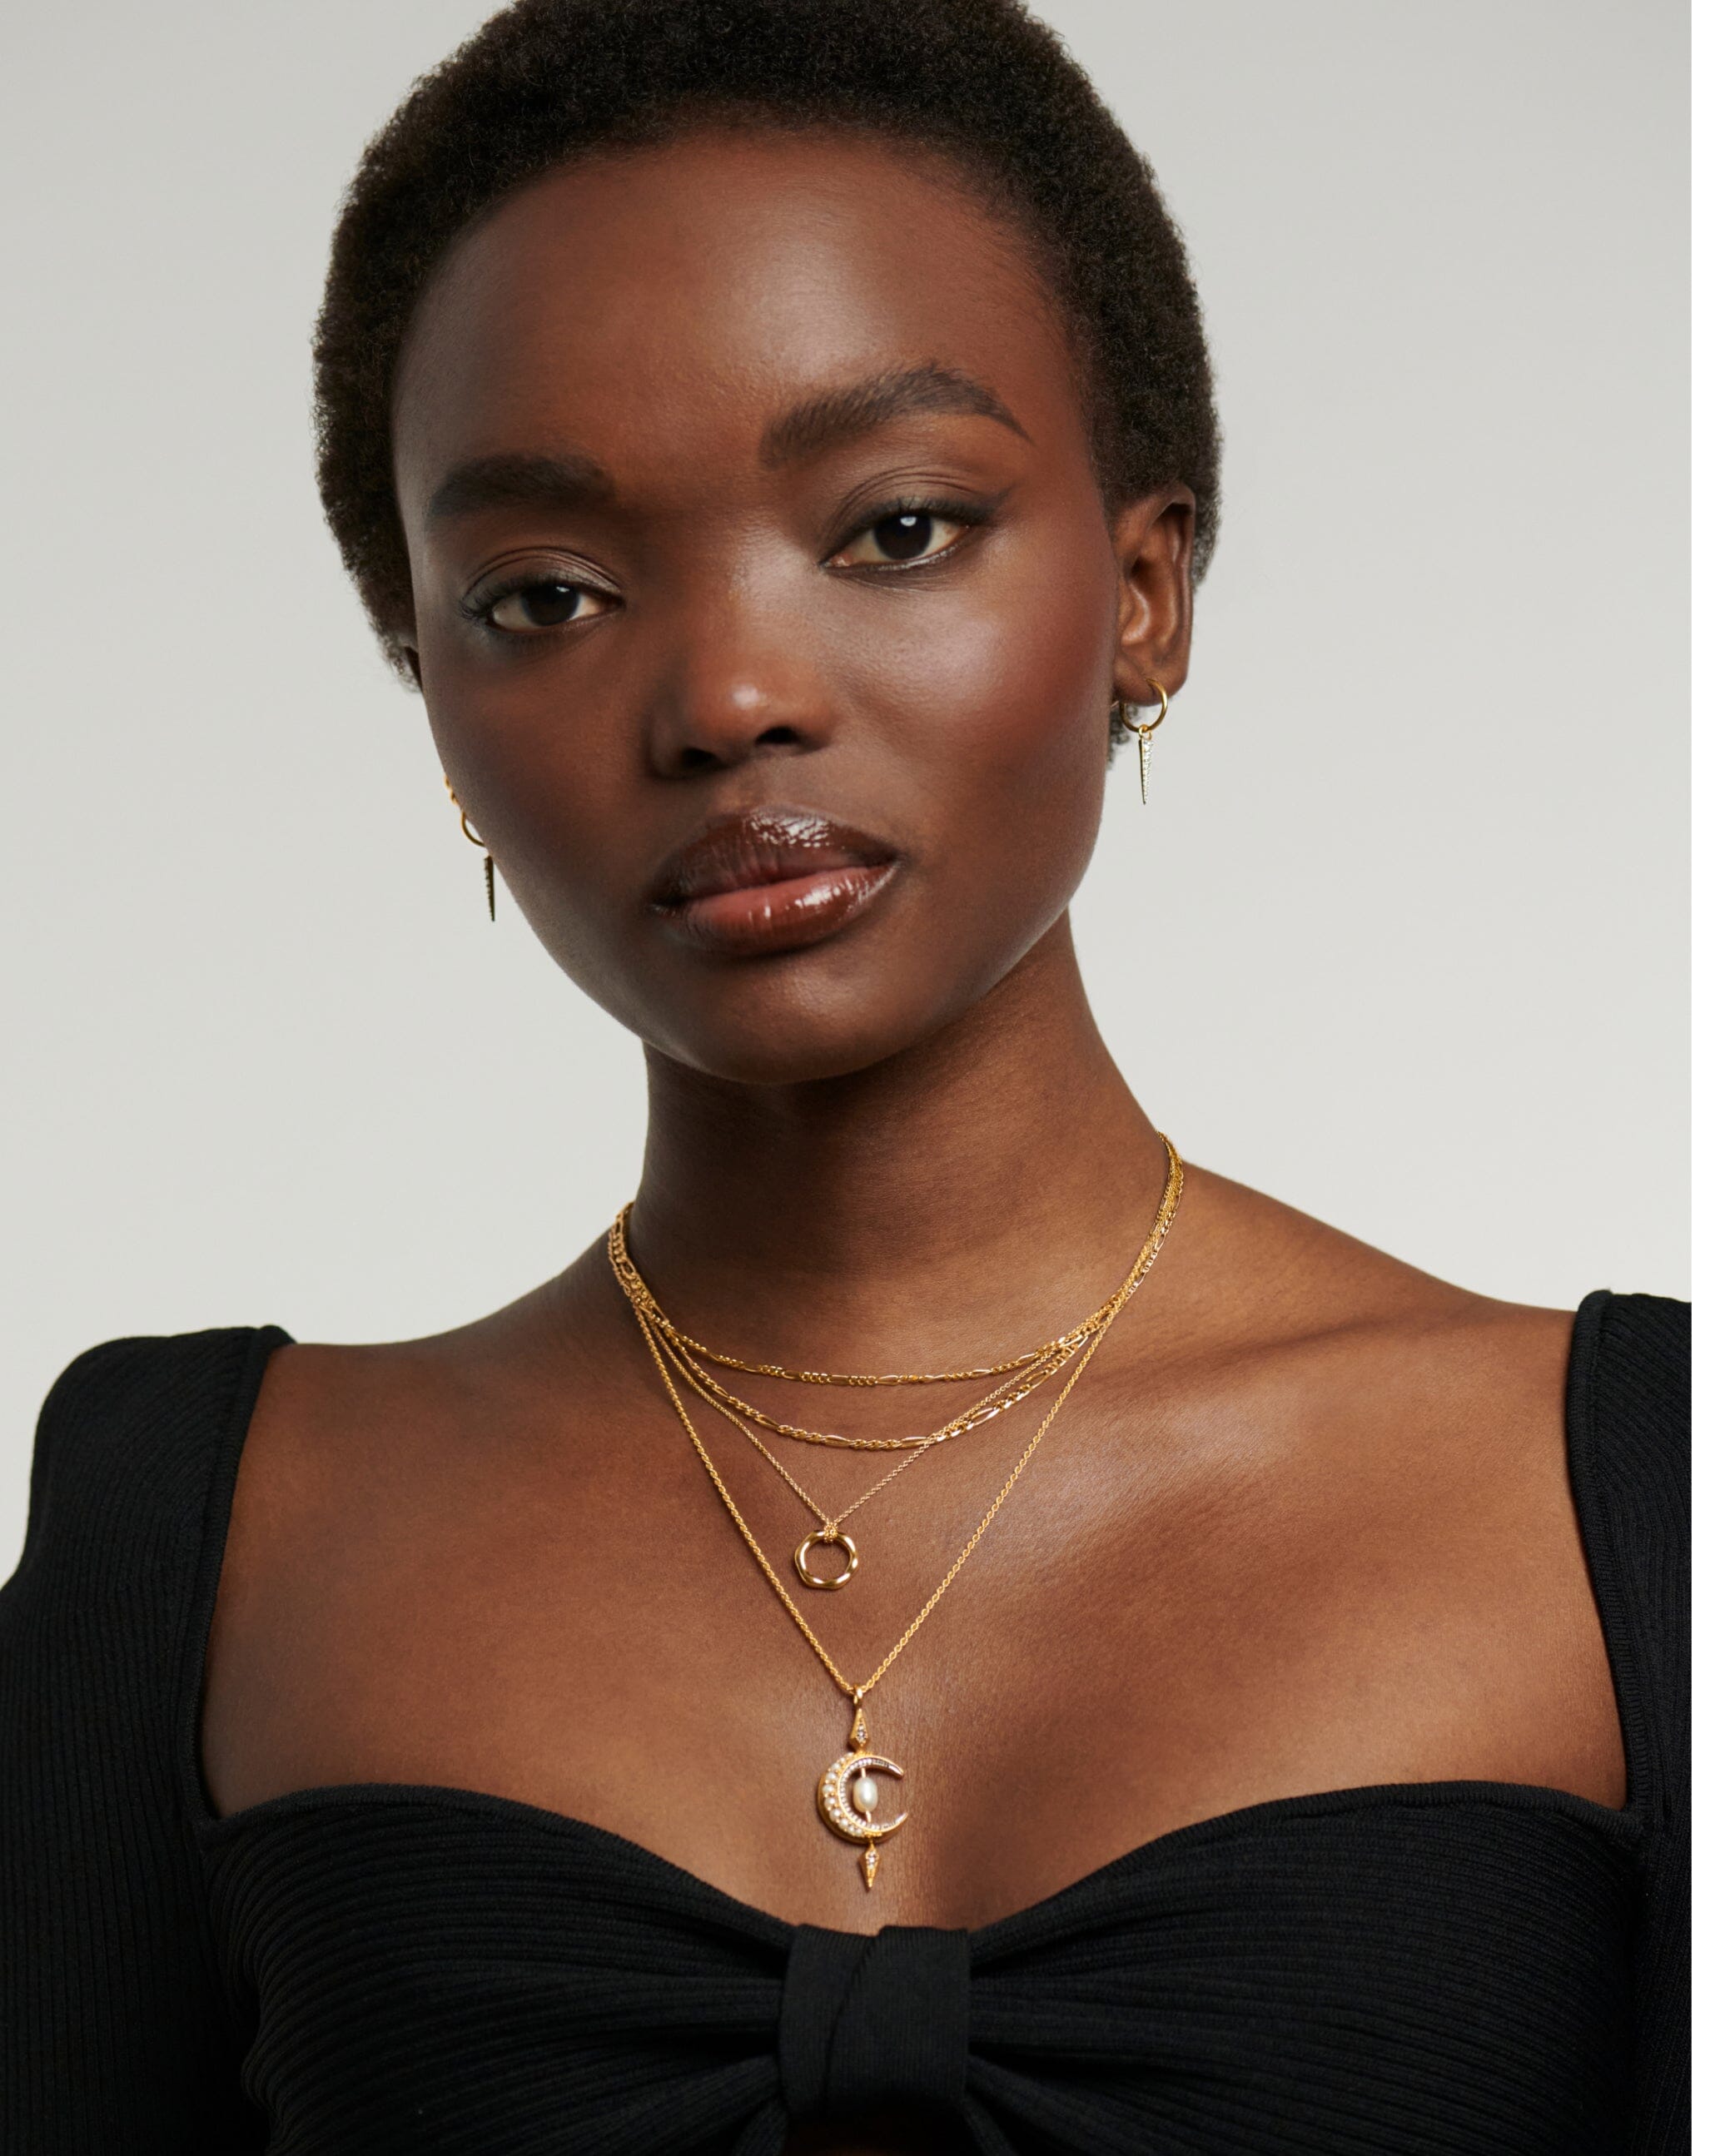 Harris Reed Crescent Moon Pearl Necklace | 18ct Gold Plated Vermeil/Pearl Necklaces Missoma 